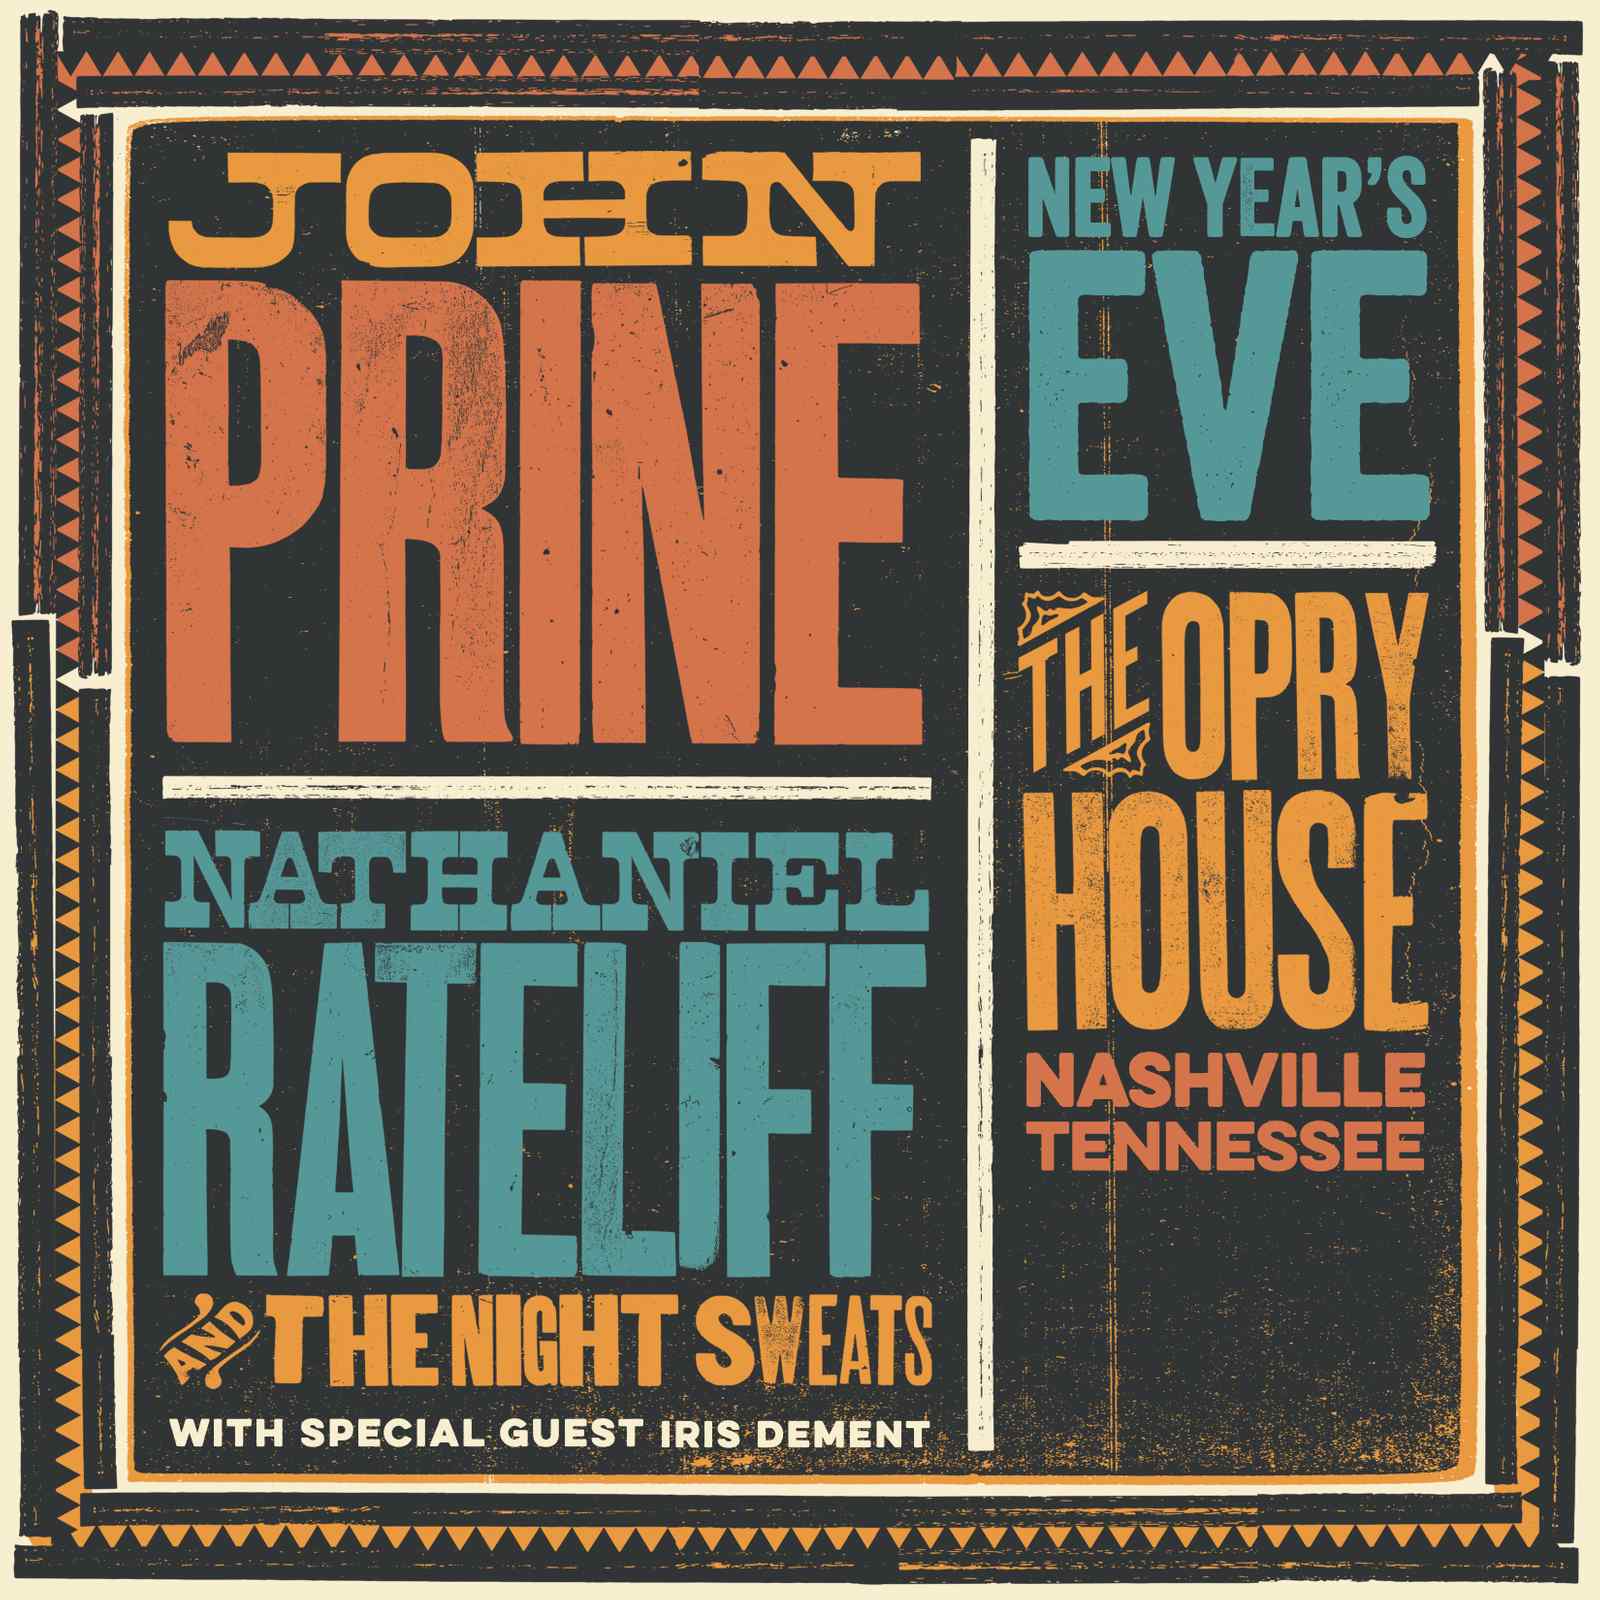 Celebrate New Year's Eve in Nashville with John at the Grand Ole Opry!